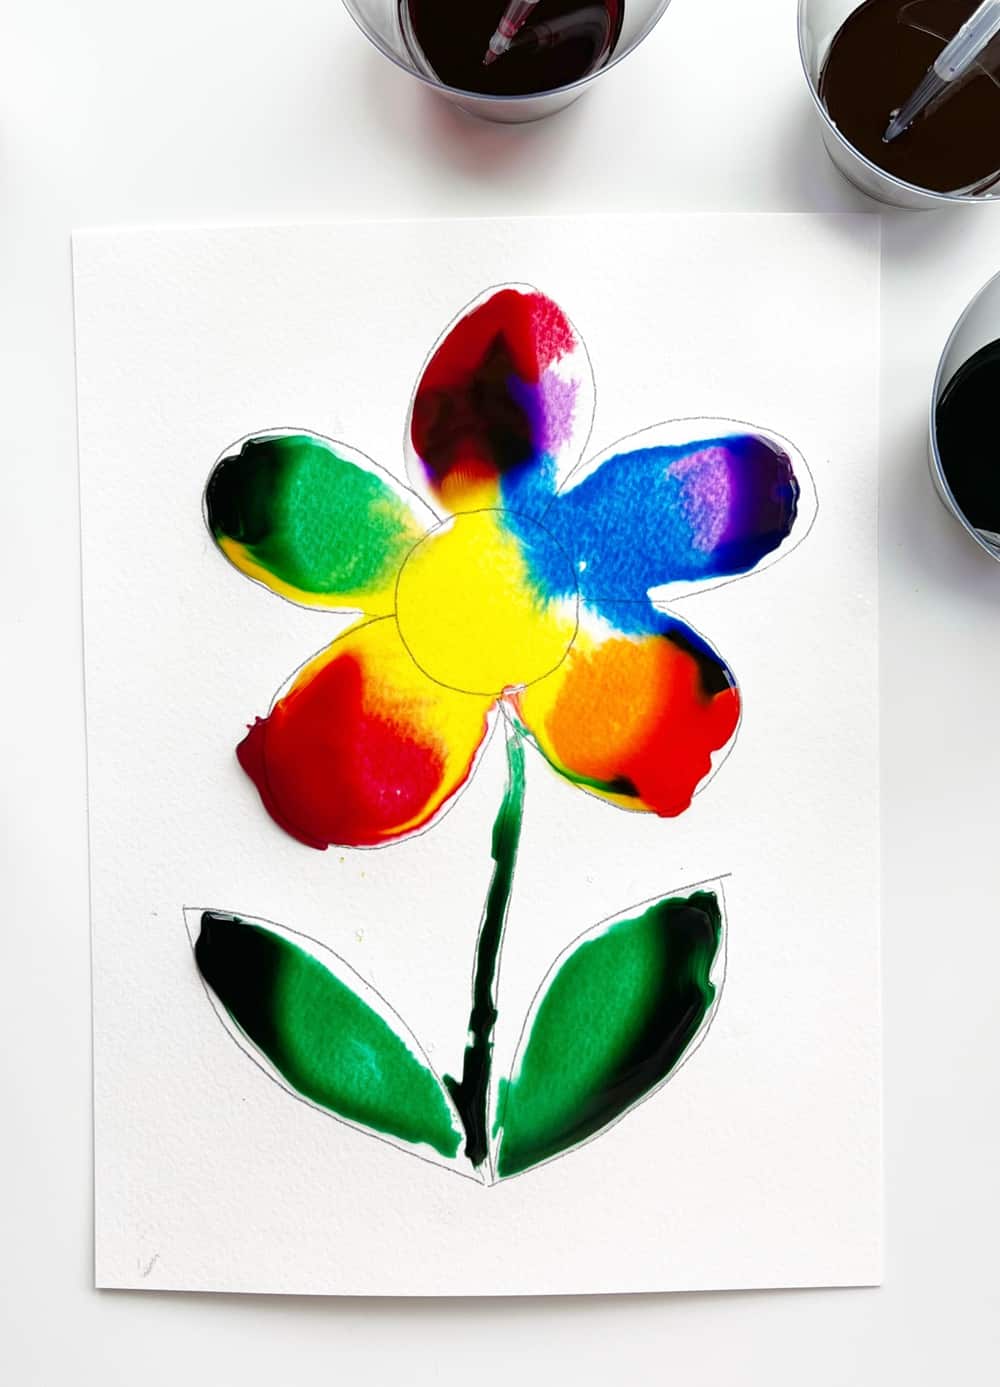 Watercolor Projects For Kids & Kids At Heart - Doodlewash®